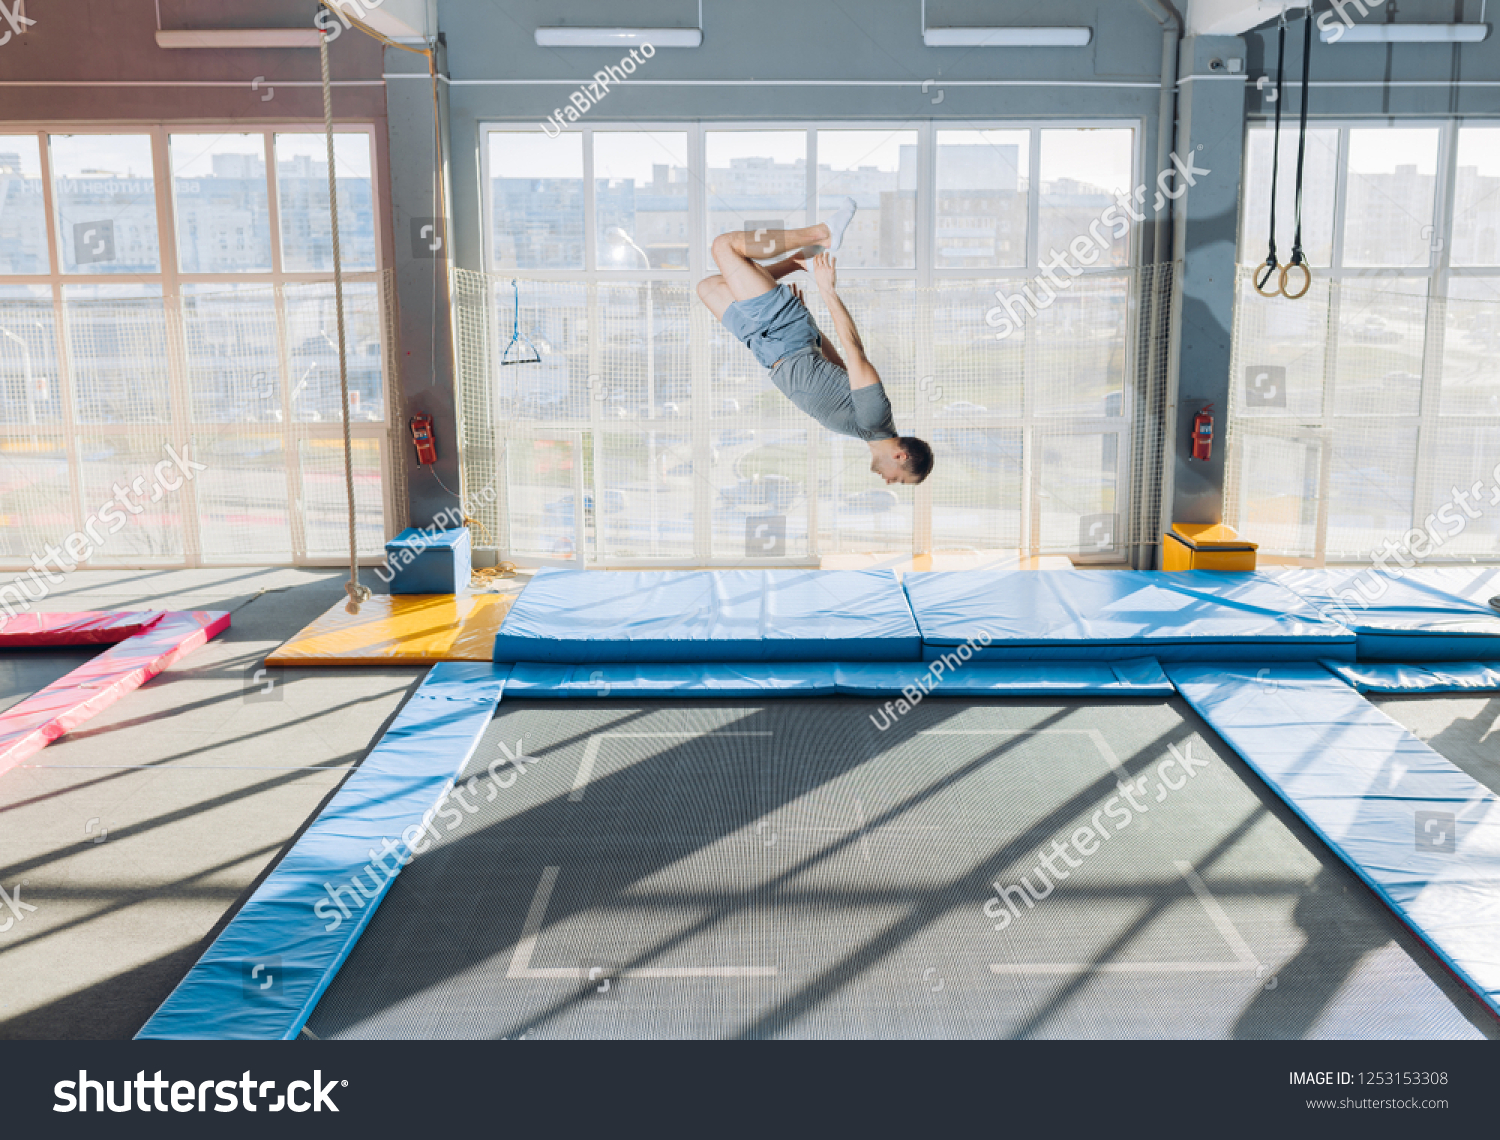 young fit flexible guy doing complex somersault on the trampoline. full length side view shot. copy space. stunt at sky park #1253153308